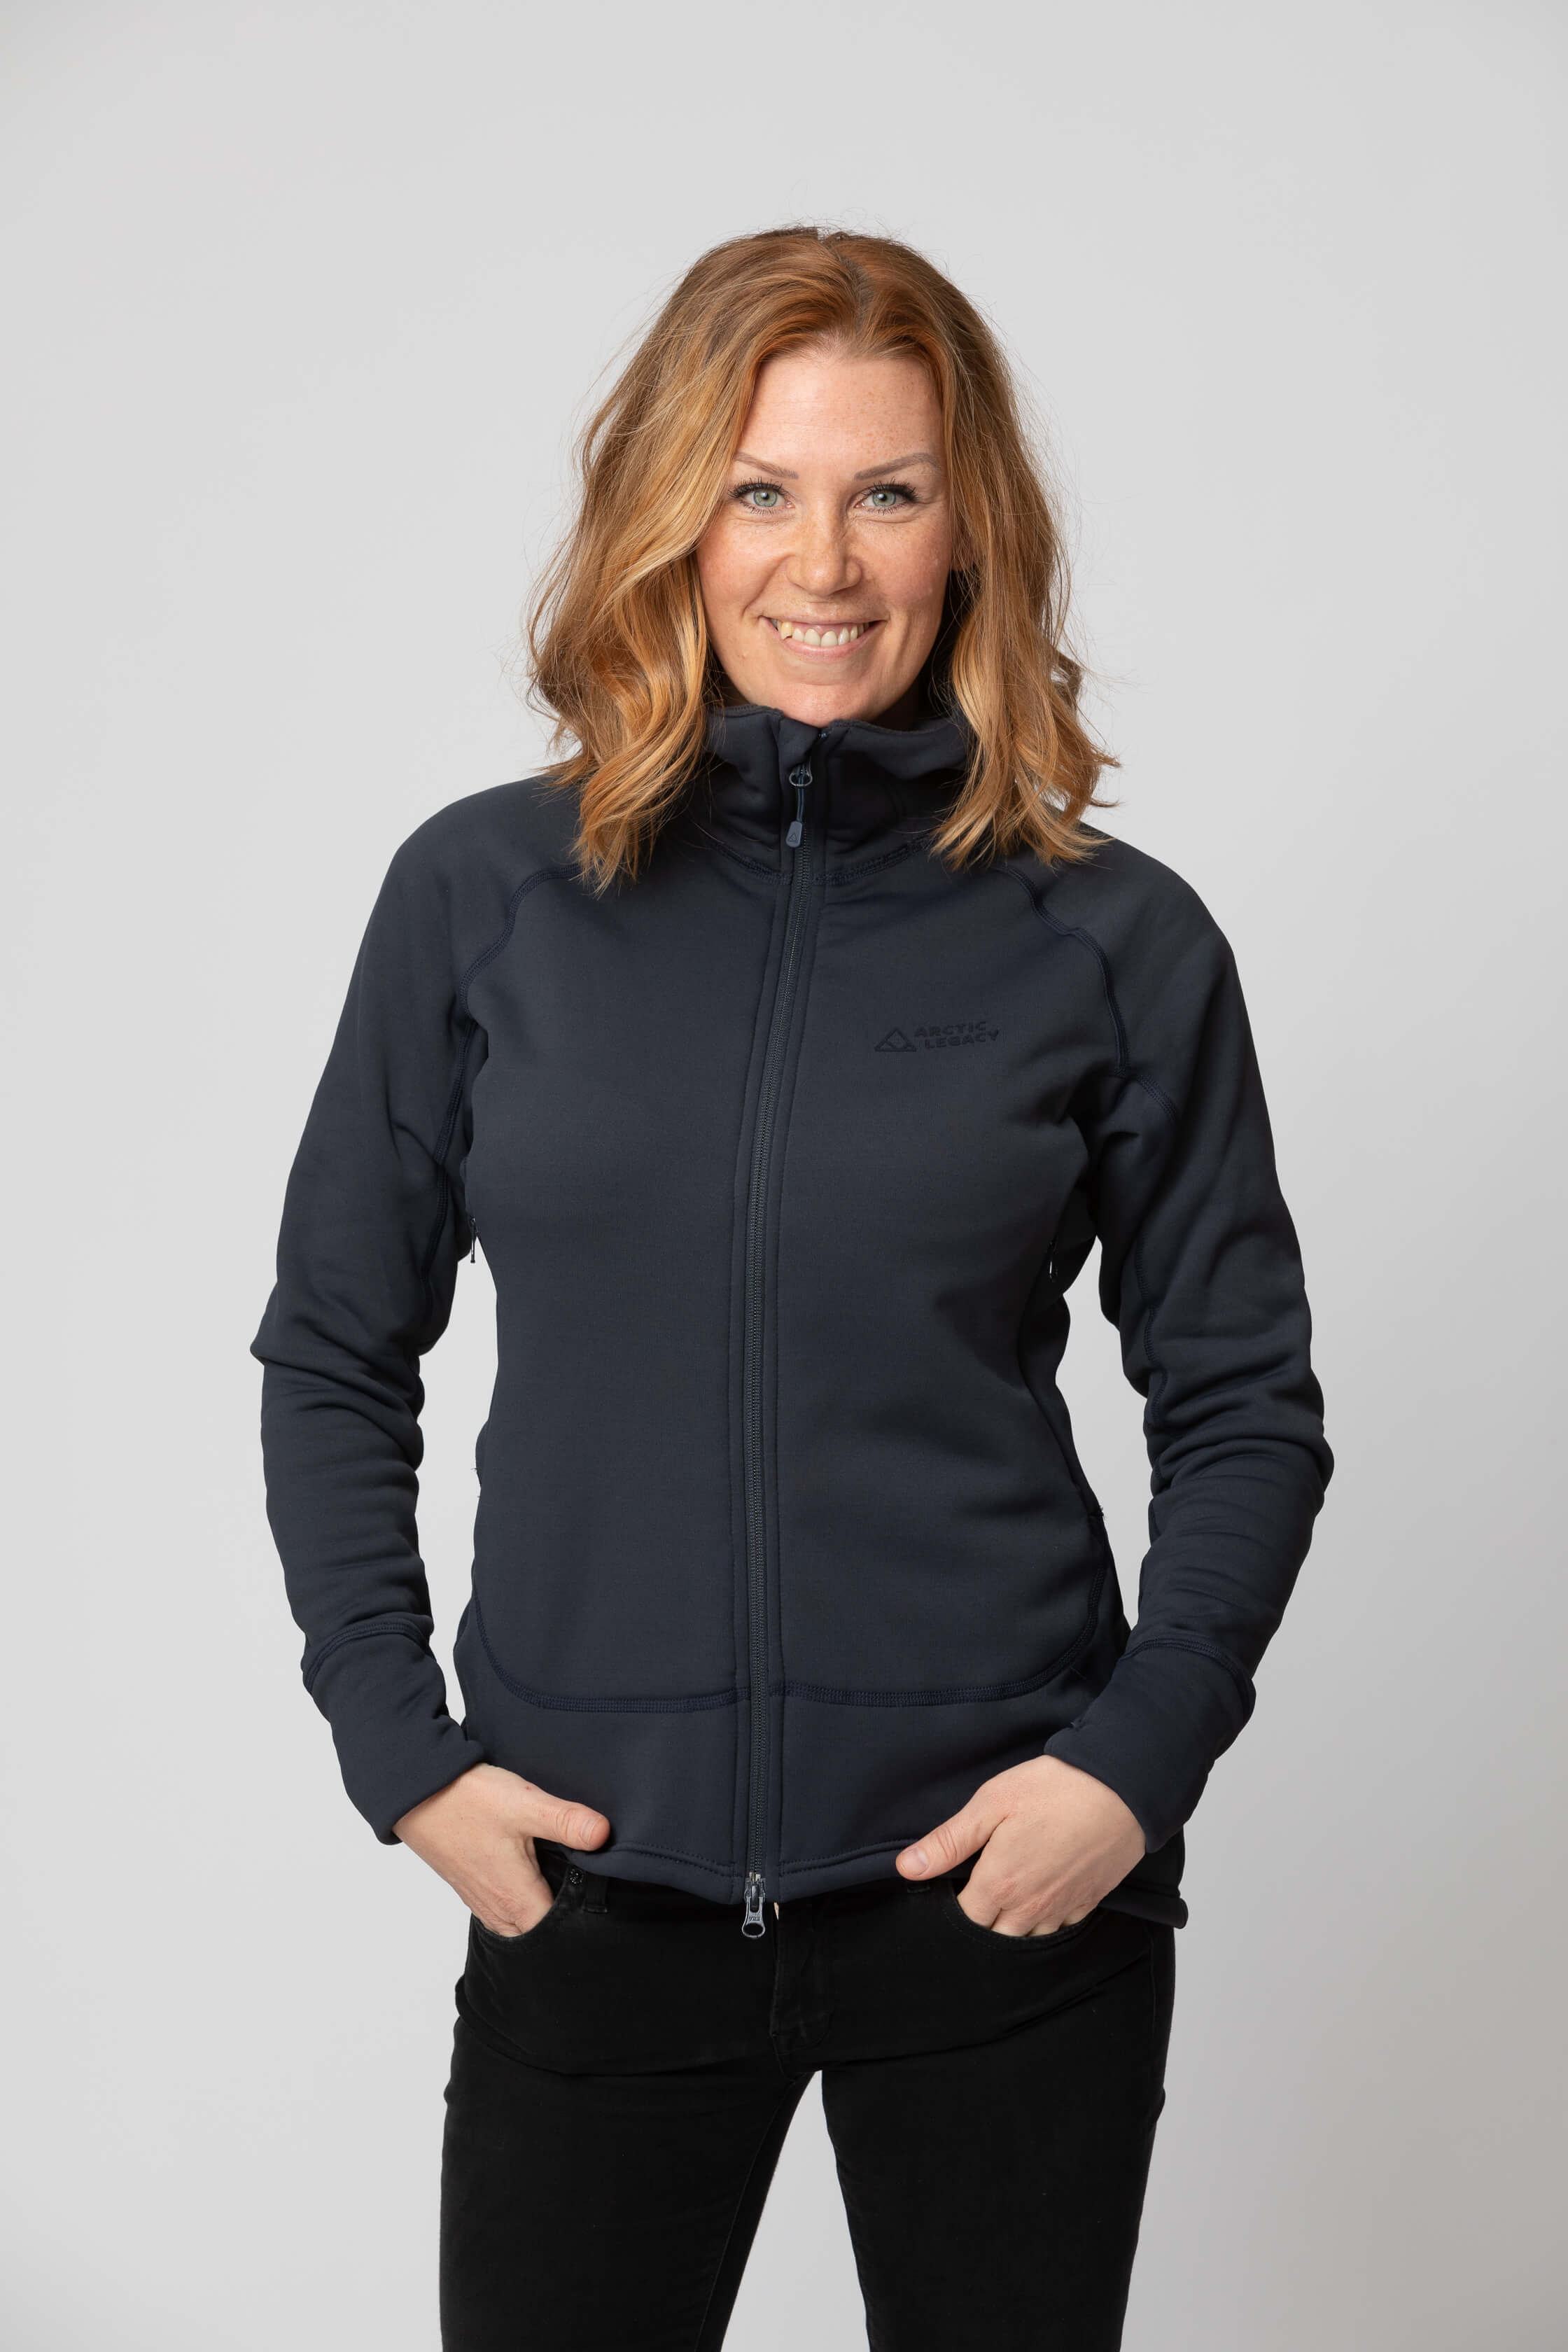 Sustainable Fleece Jackets for Women - Made in Europe - Arctic Legacy